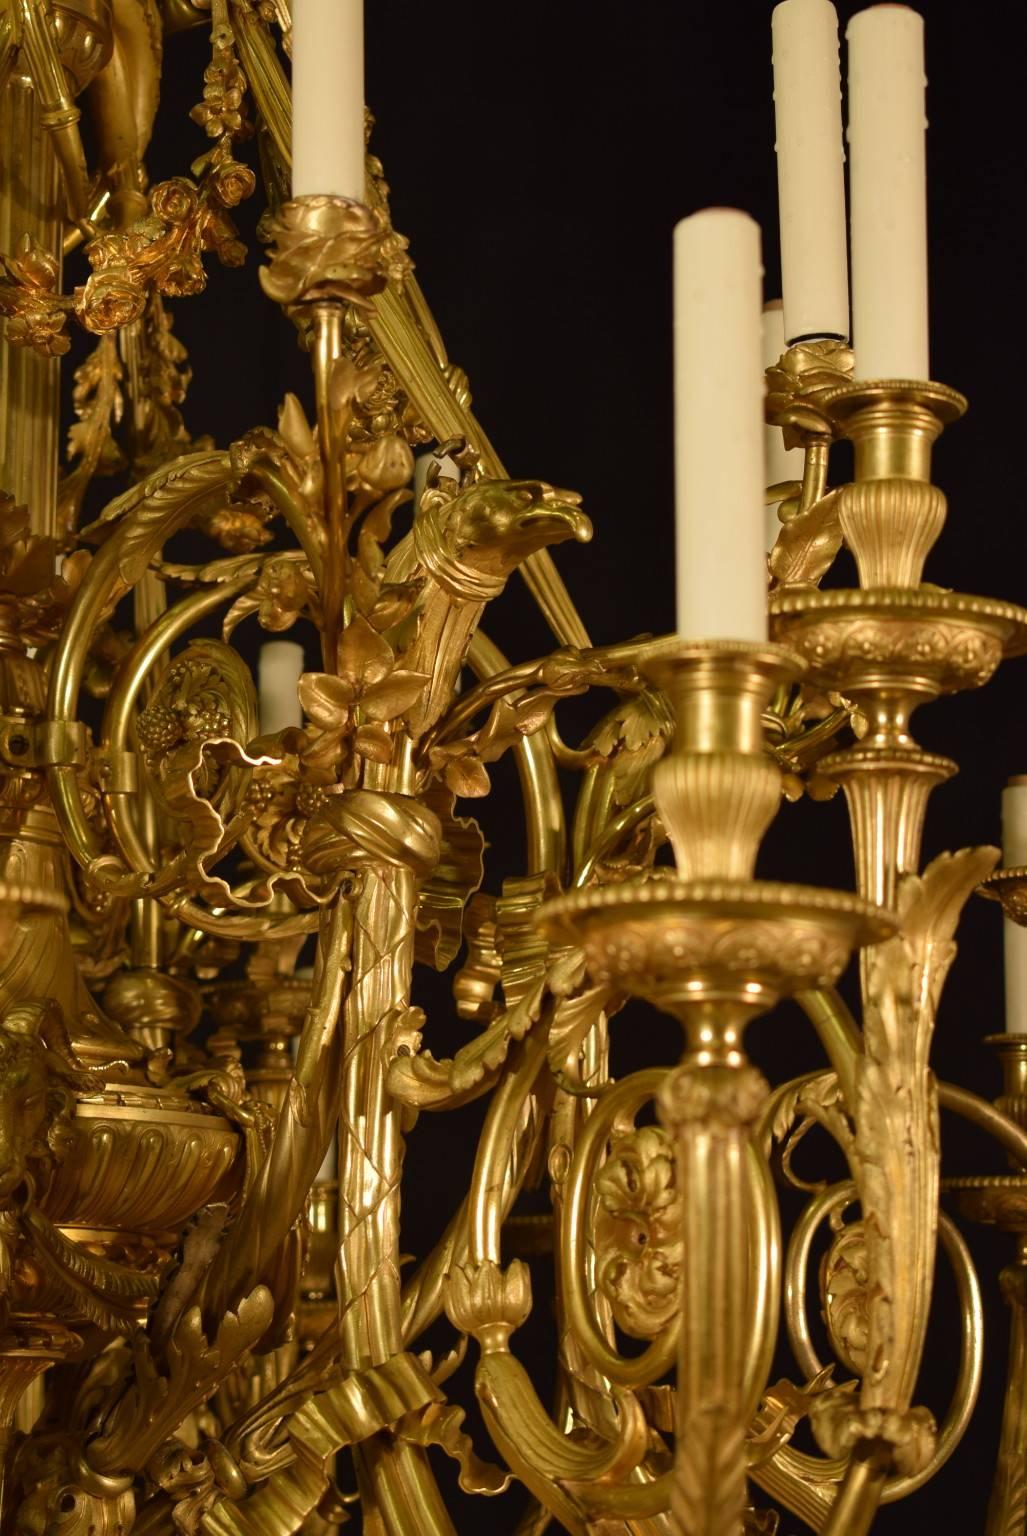 Magnificent mid-19th century chandelier, original mercury gilding showing a rich contrast of matte and burnished areas. The chandelier features a profuse array of Neoclassical ornaments such an a stylized eagle head issuing arms ending in elaborate